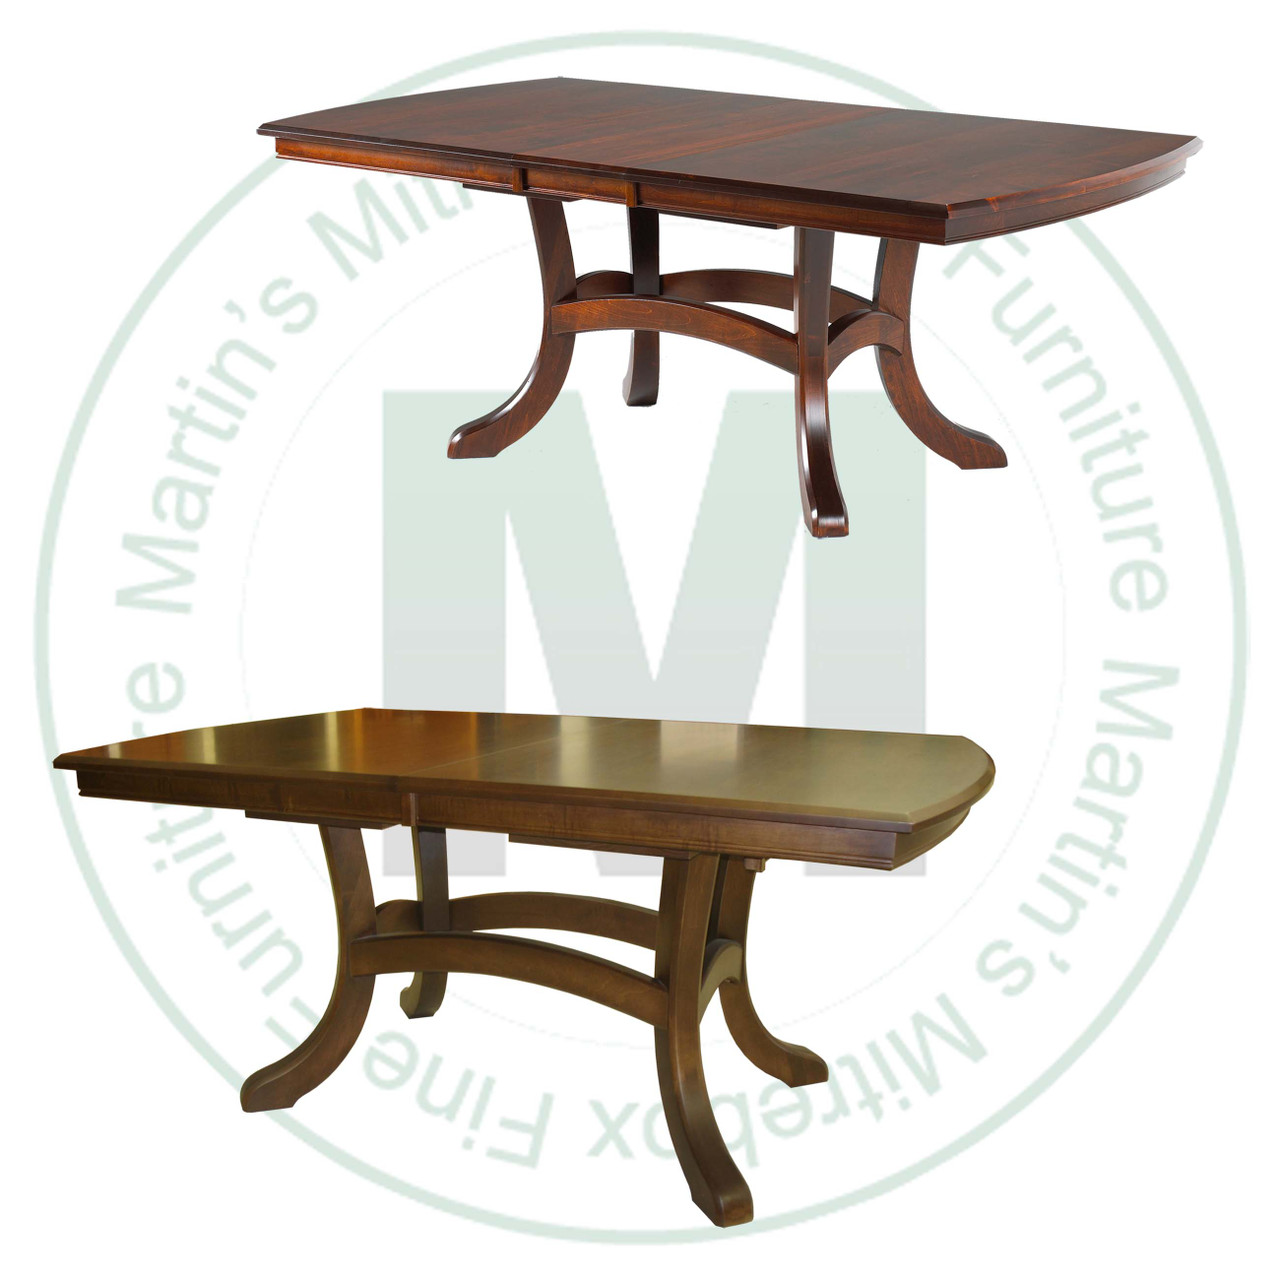 Oak Jordan Double Pedestal Table 54''D x 84''W x 30''H With 2 - 12'' Leaves. Table Has 1'' Thick Top